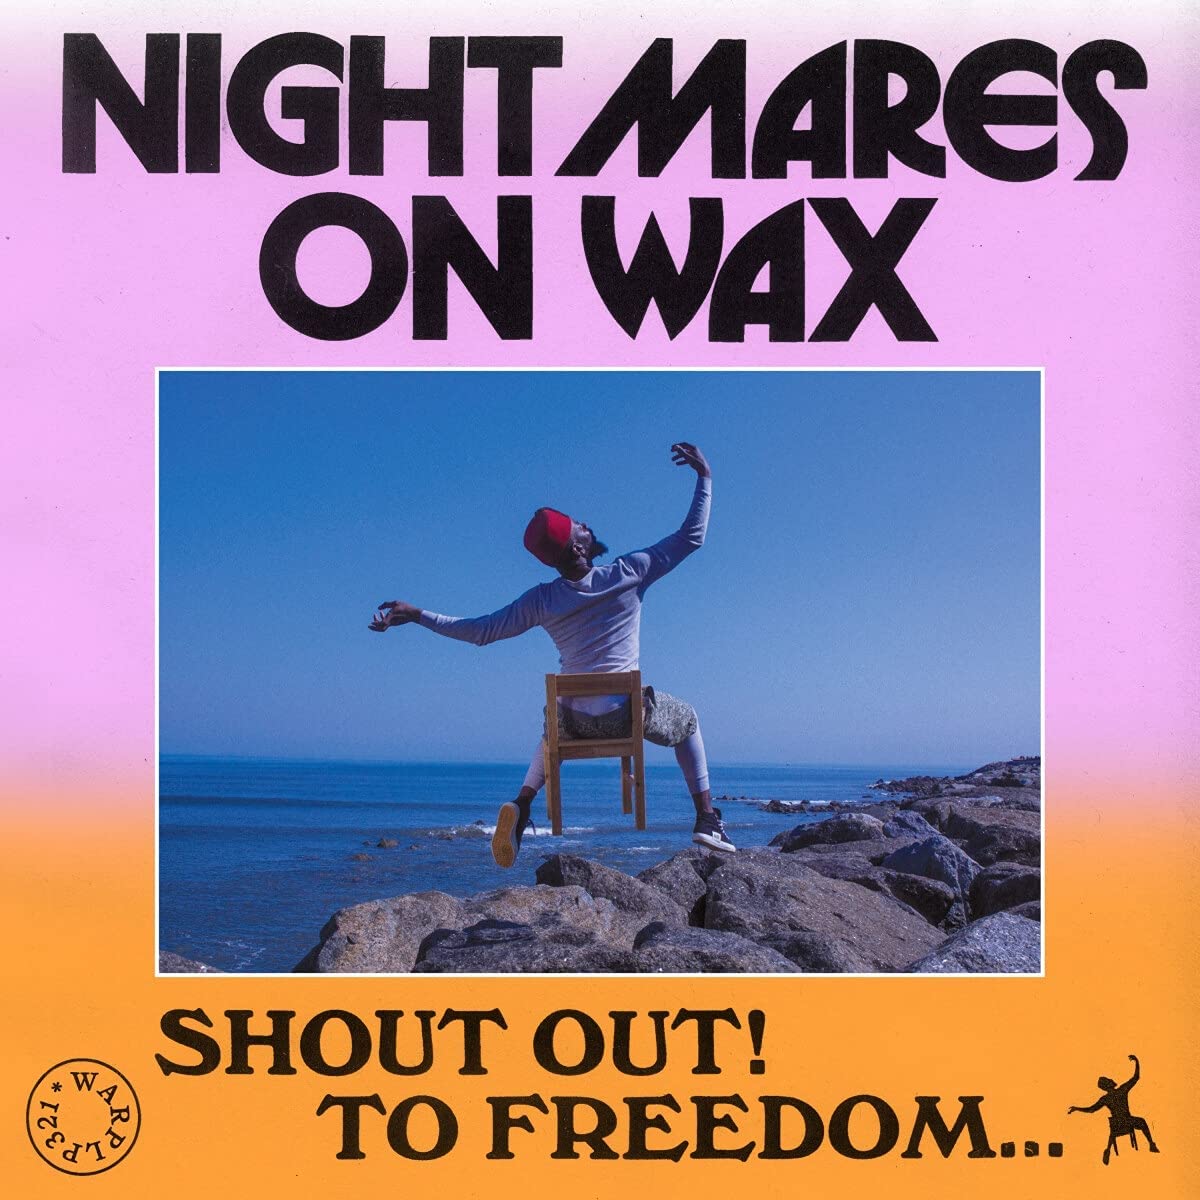 Nightmares On Wax Shout Out! To Freedom - Ireland Vinyl